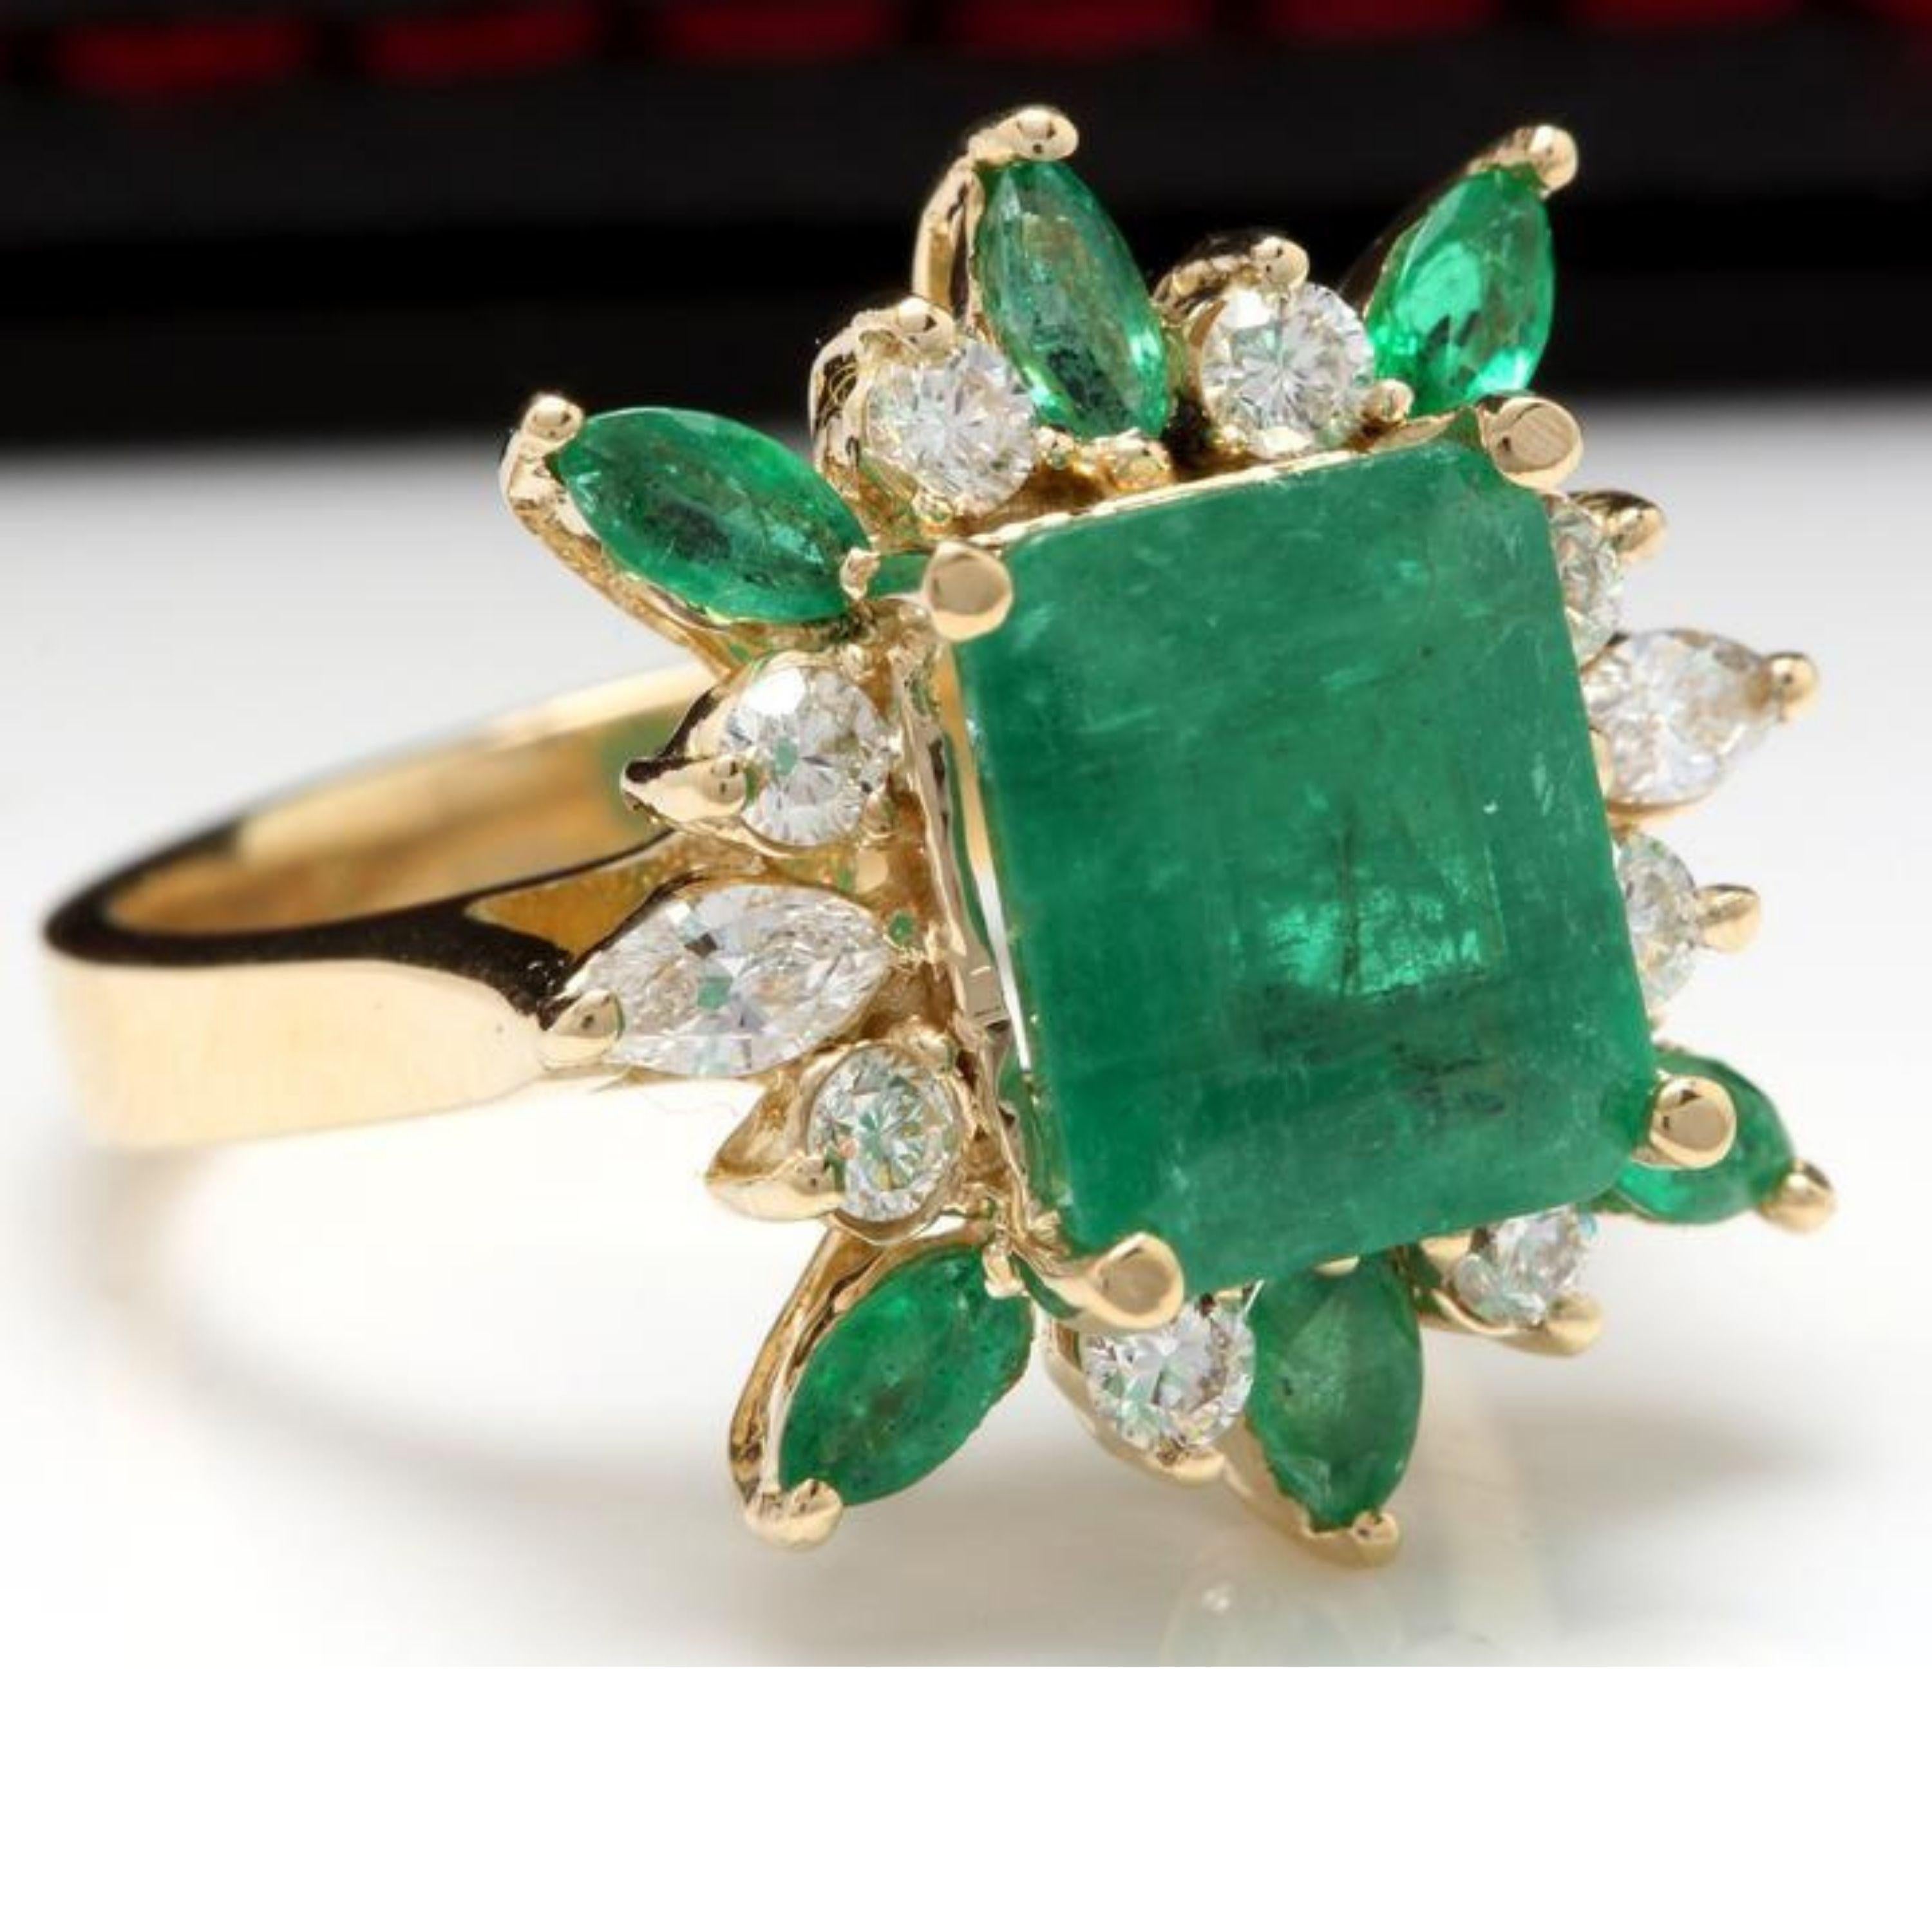 5.05 Carats Natural Emerald and Diamond 14K Solid Yellow Gold Ring

Total Natural Green Emerald Weight is: Approx. 3.95 Carats (transparent)

Emerald Measures: Approx. 9.23 x 7.70mm

Emerald Treatment: Oiling

Natural Round & Marquise Diamonds